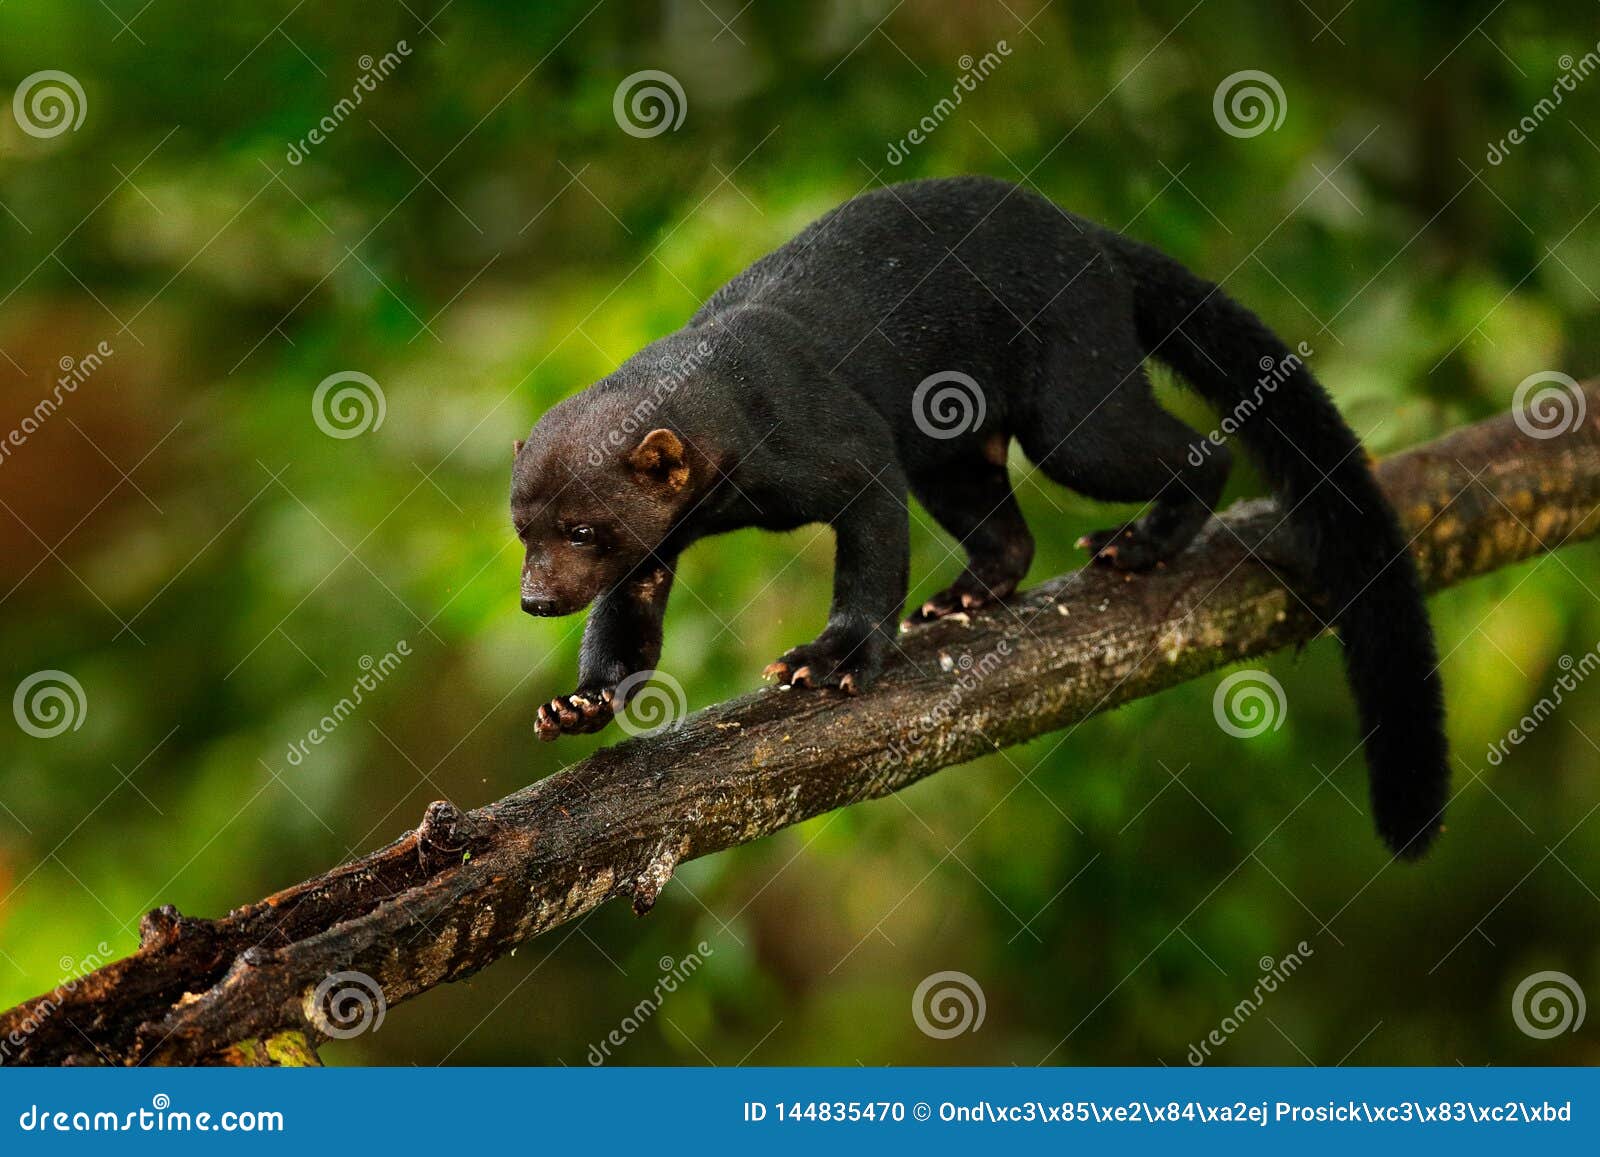 tayra, eira barbara, omnivorous animal from the weasel family. tayra hidden in tropic forest, sitting on the green tree. wildlife